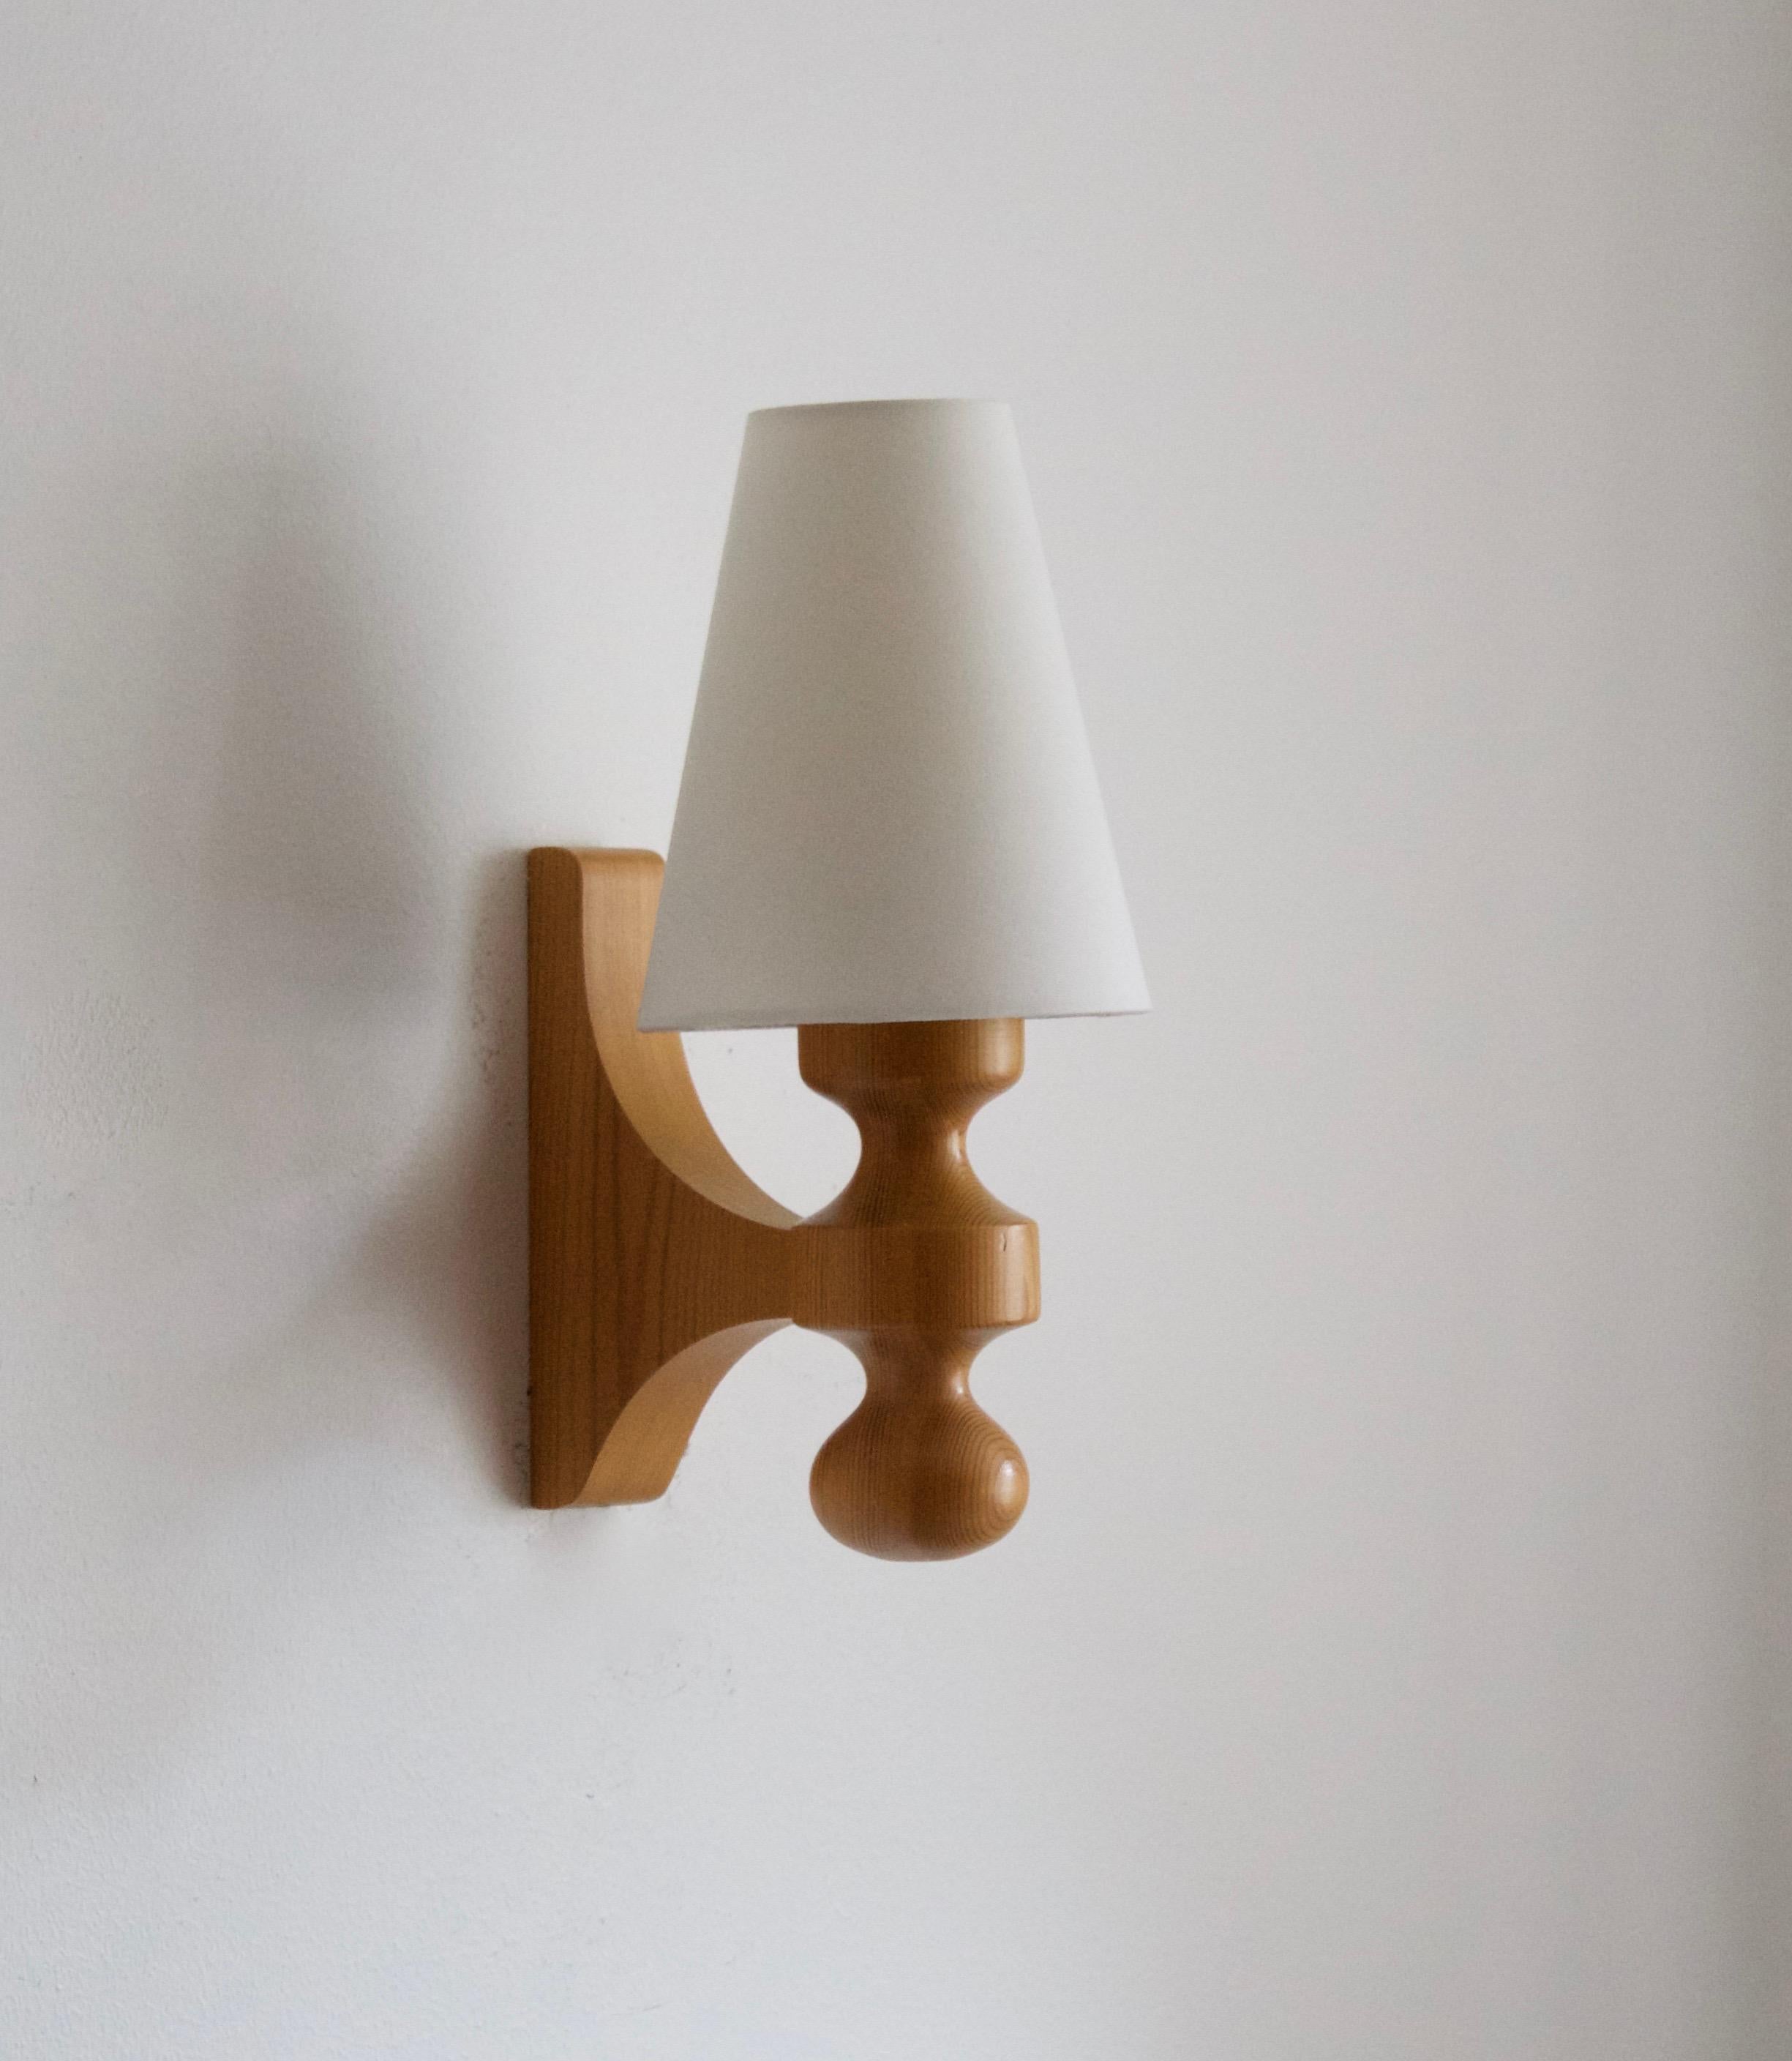 A sculptural solid pine wall light / sconce, Sweden, 1970s. Brand new lampshade.

Stated dimensions include lampshade. 

Other designers of the period include Axel Einar Hjorth, Roland Wilhelmsson, Charlotte Perriand, Pierre Chapo, and Yasha